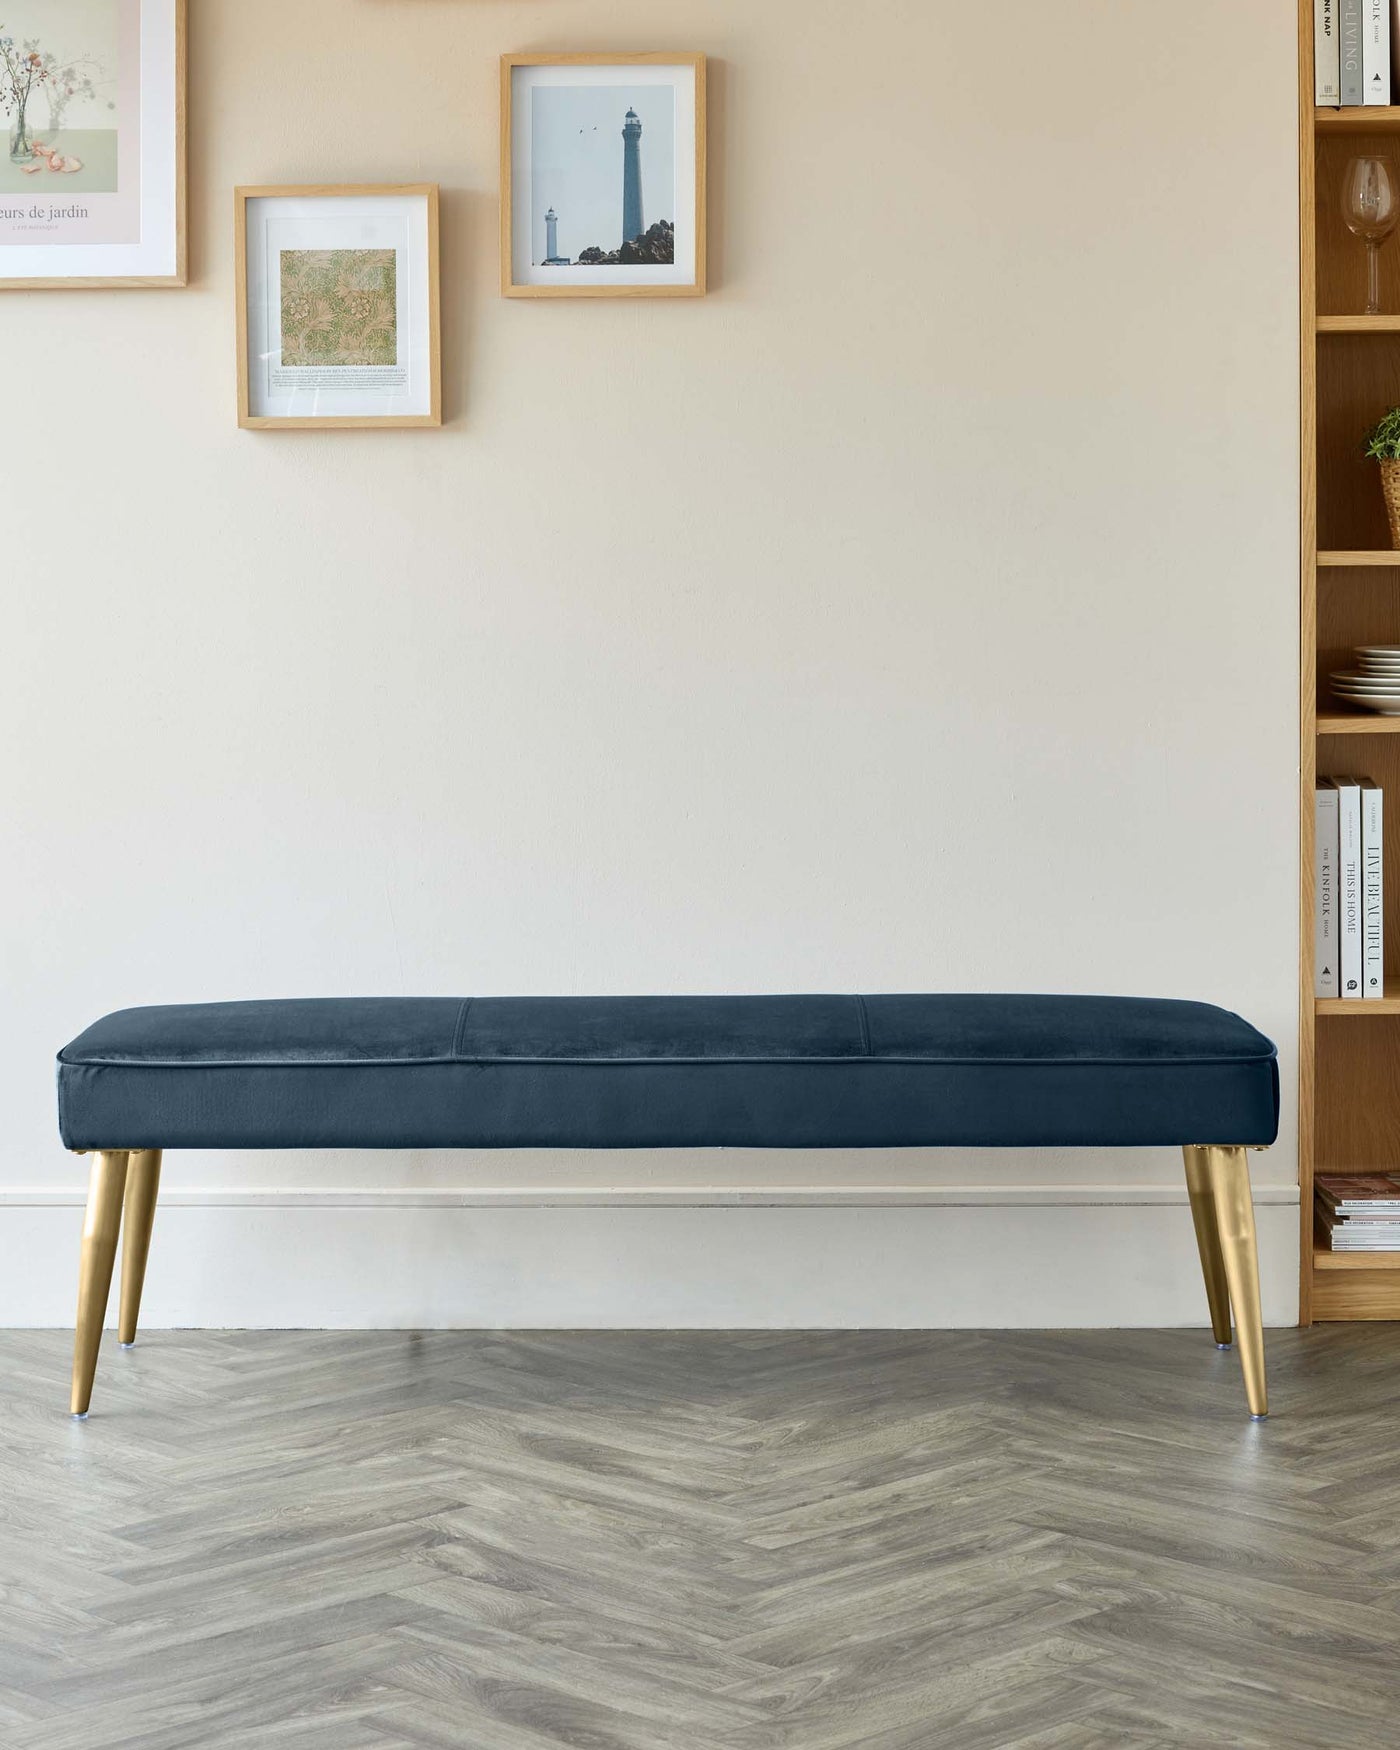 A contemporary navy blue upholstered bench with plush cushioning and sleek gold-tipped legs, positioned against a neutral wall with framed artwork and adjacent to a wooden bookshelf.